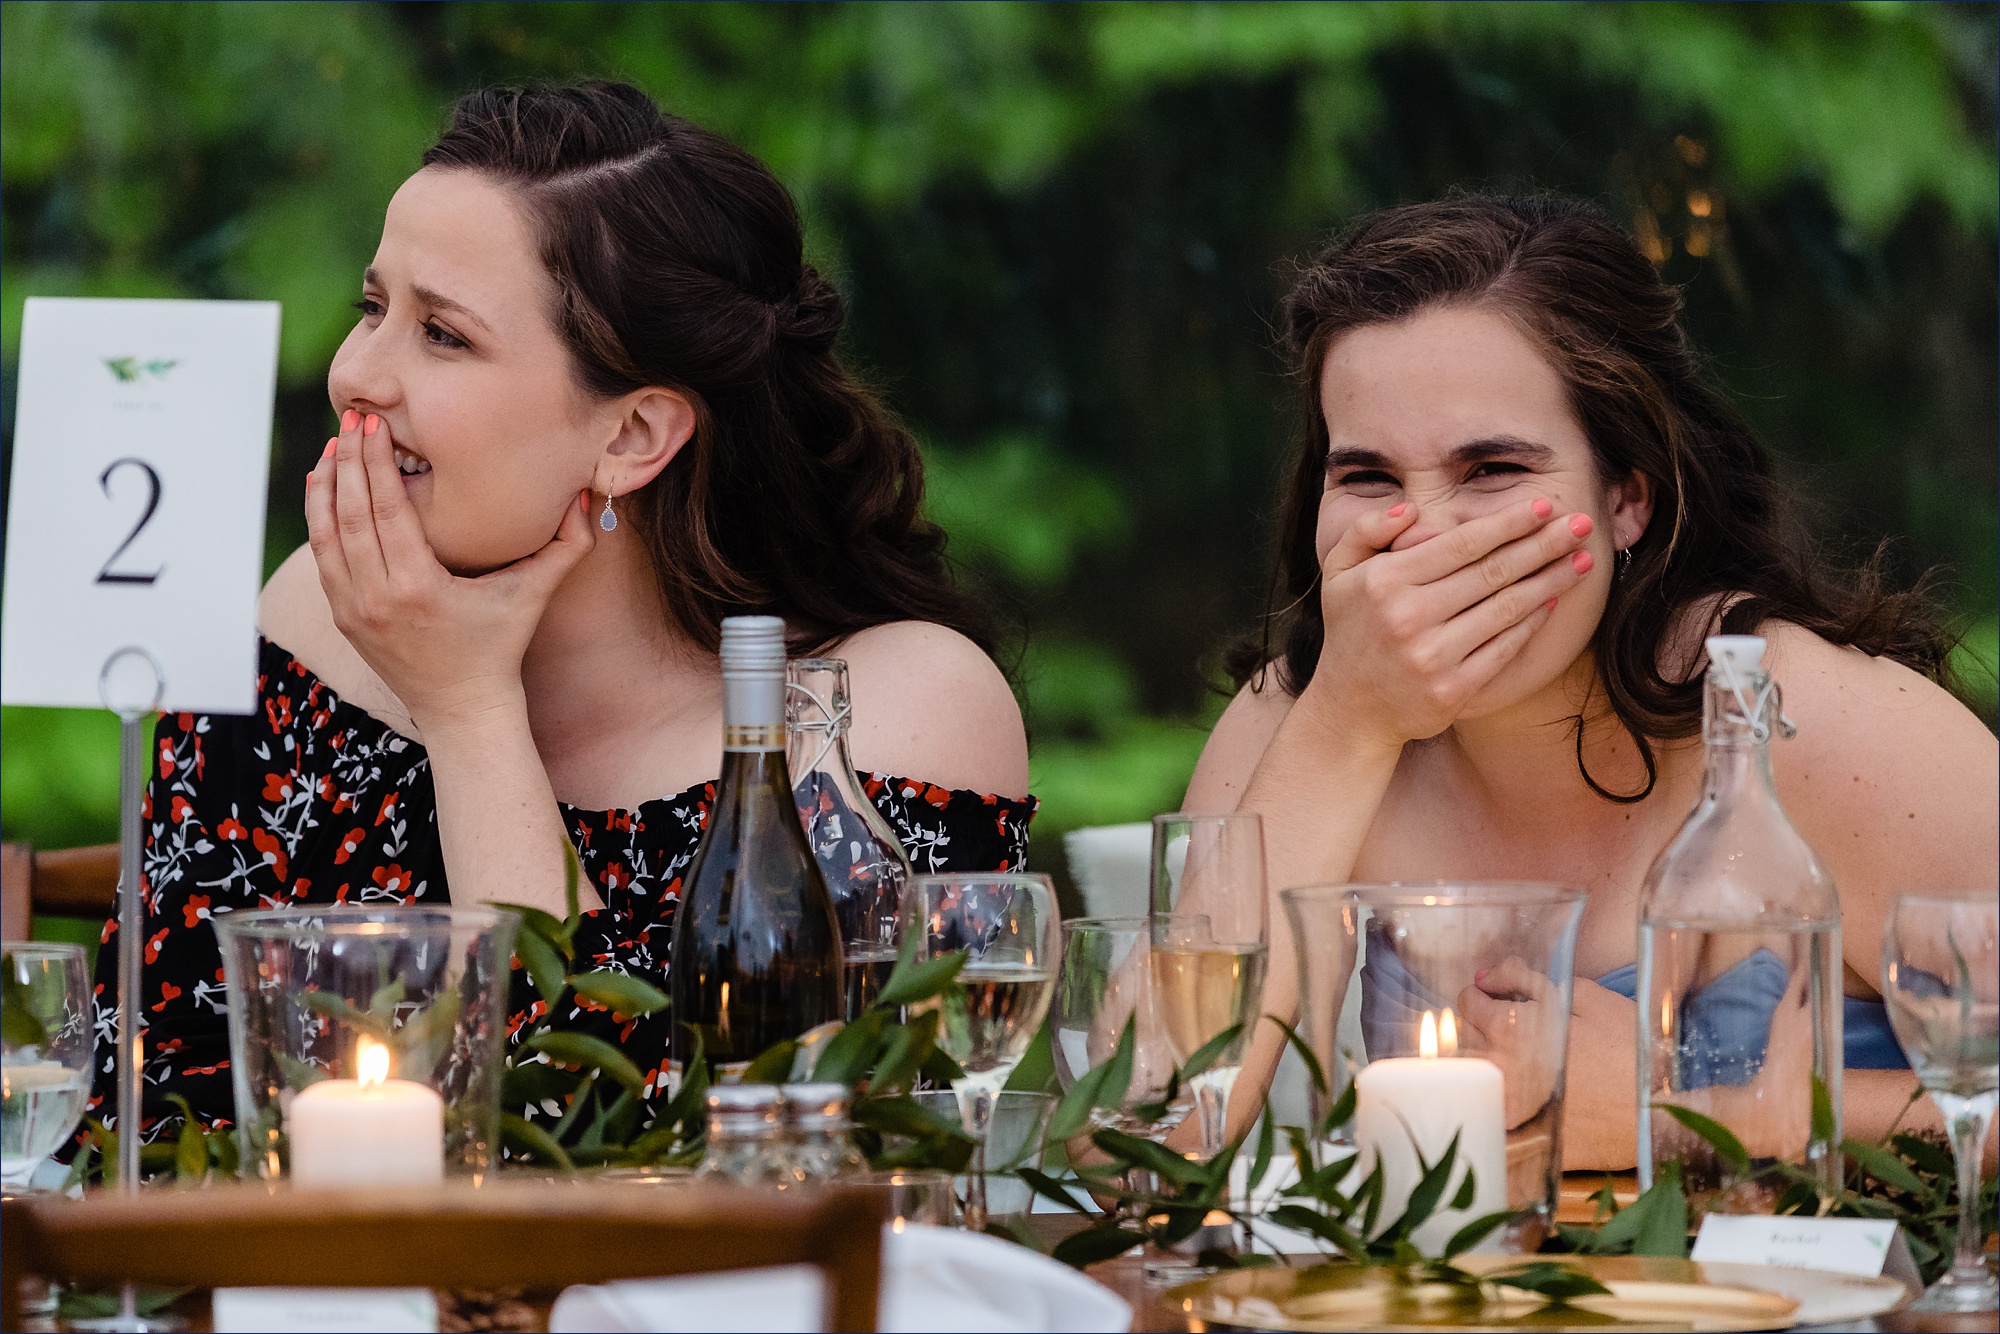 Guests laugh at the toasts at the outdoor Maine wedding reception